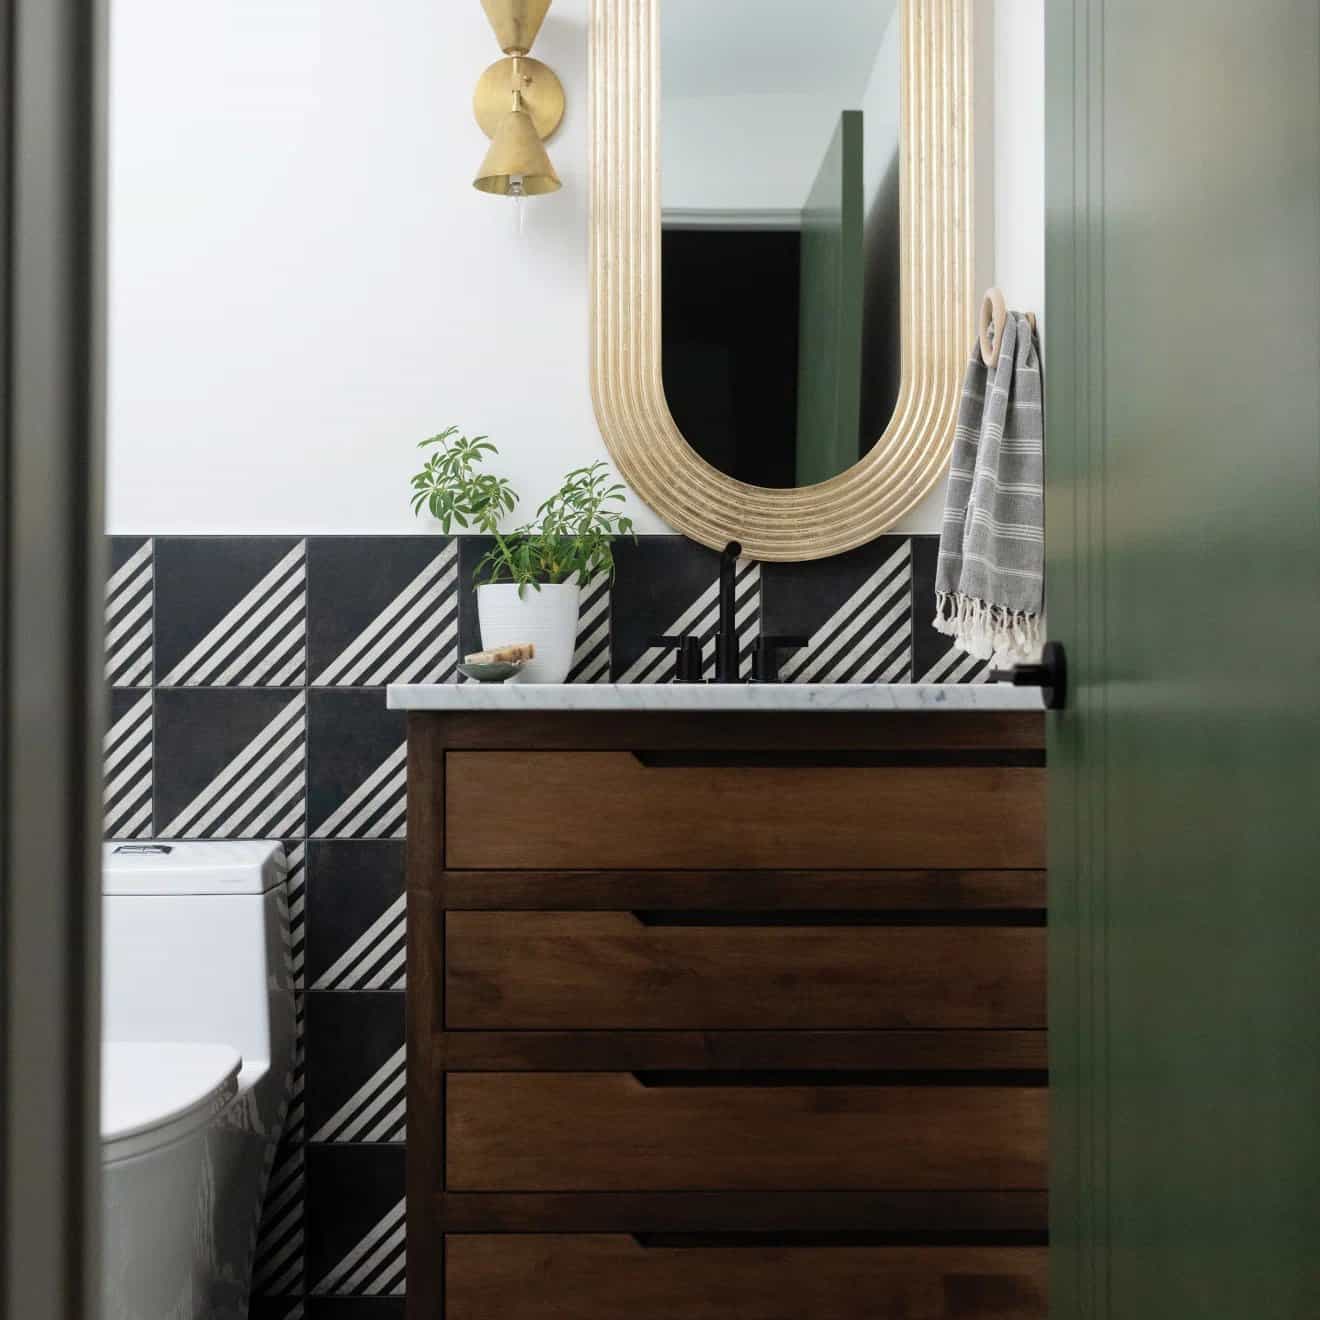 Be Creative With A Fun Pattern On Matte Black Tiles